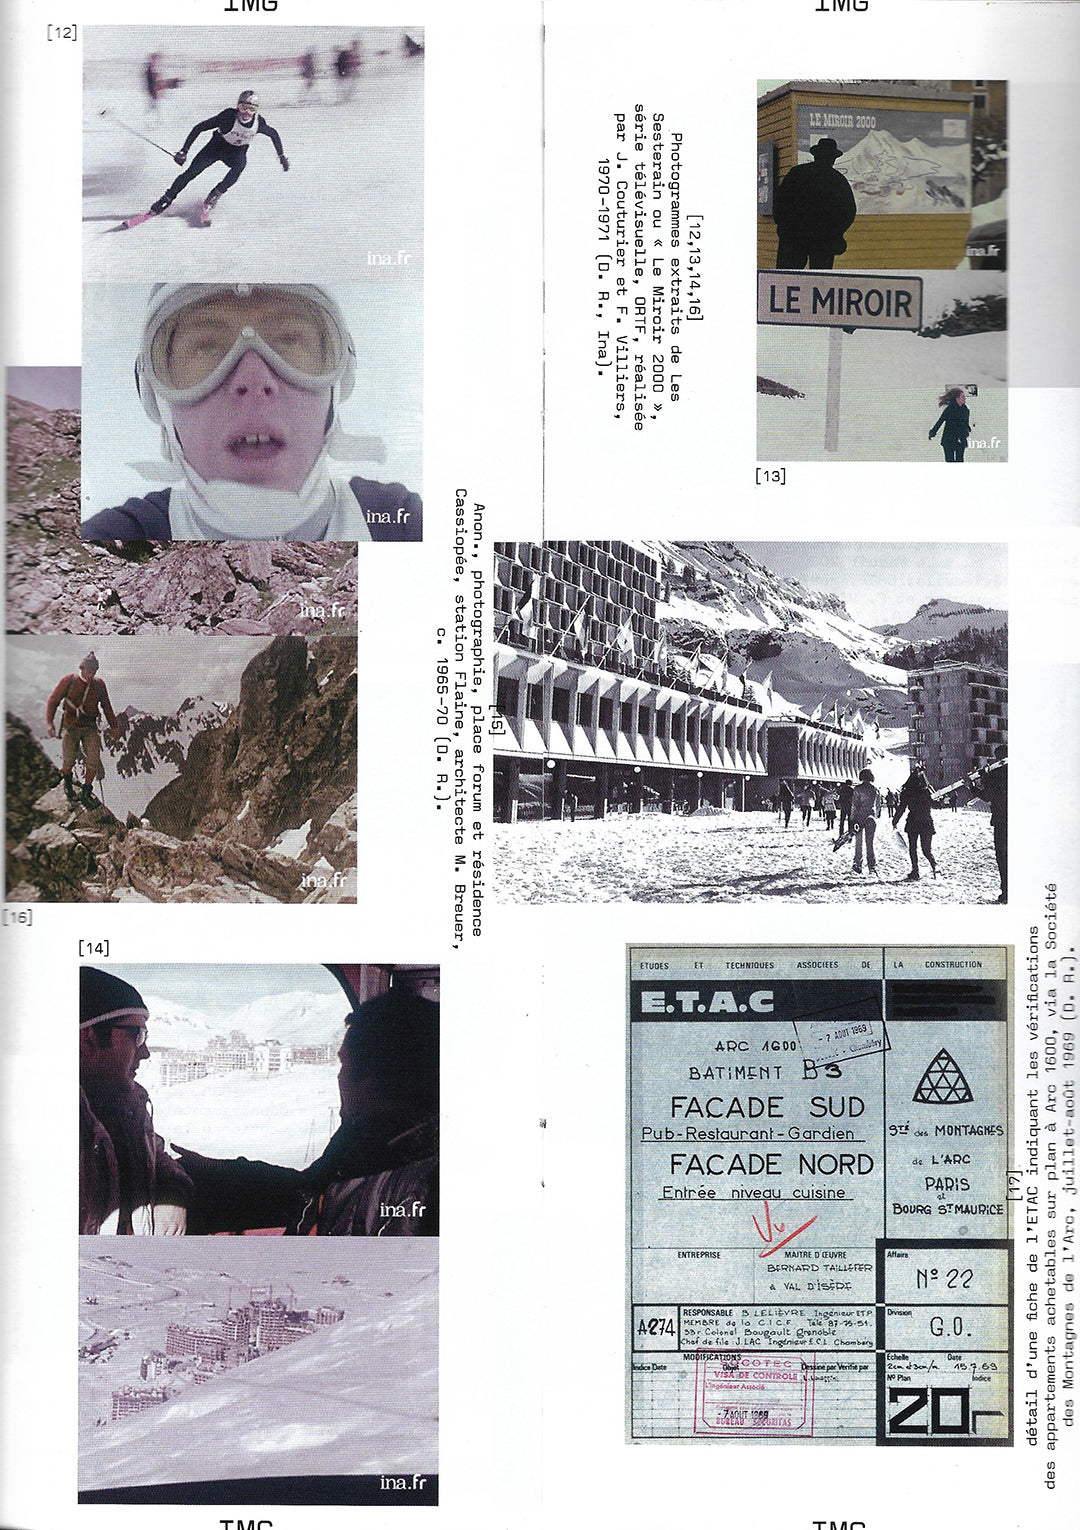 n°20 — A ski resort: Pierre Faucheux and Les Arcs. From the space to the sign.